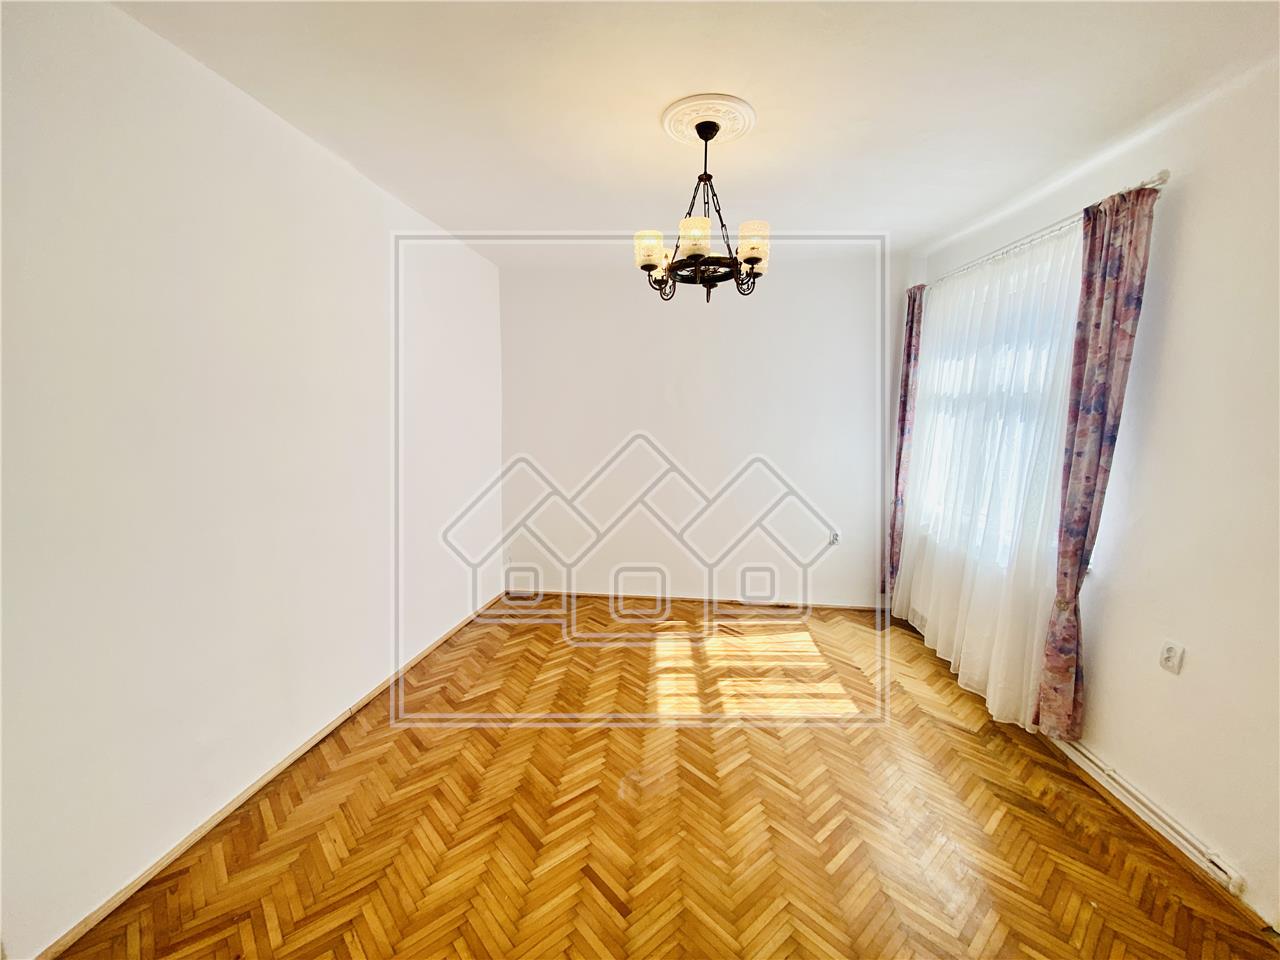 Apartment for sale in Sibiu - 2 rooms and 40 sqm garden - Central Area